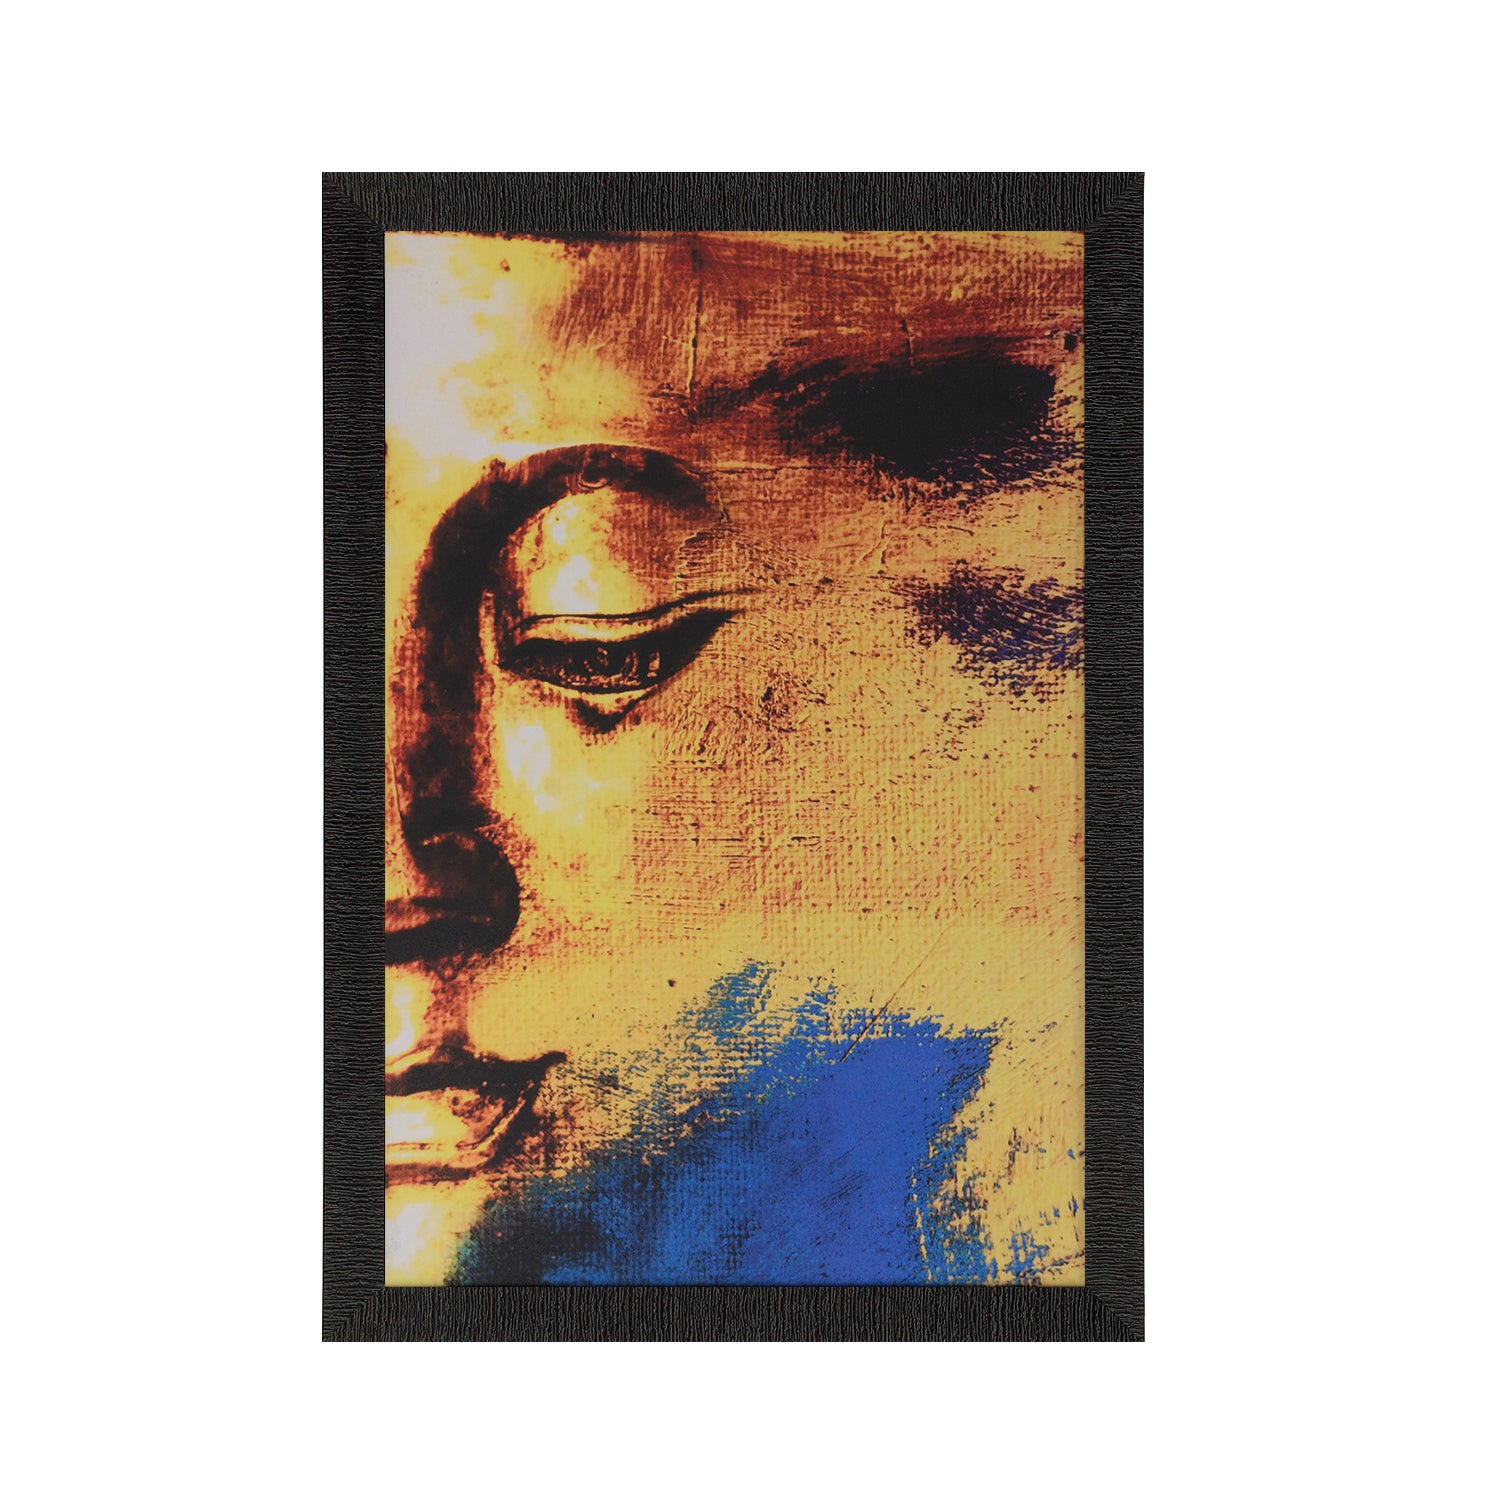 Lord Buddha Painting Digital Printed Abstract Religious Wall Art